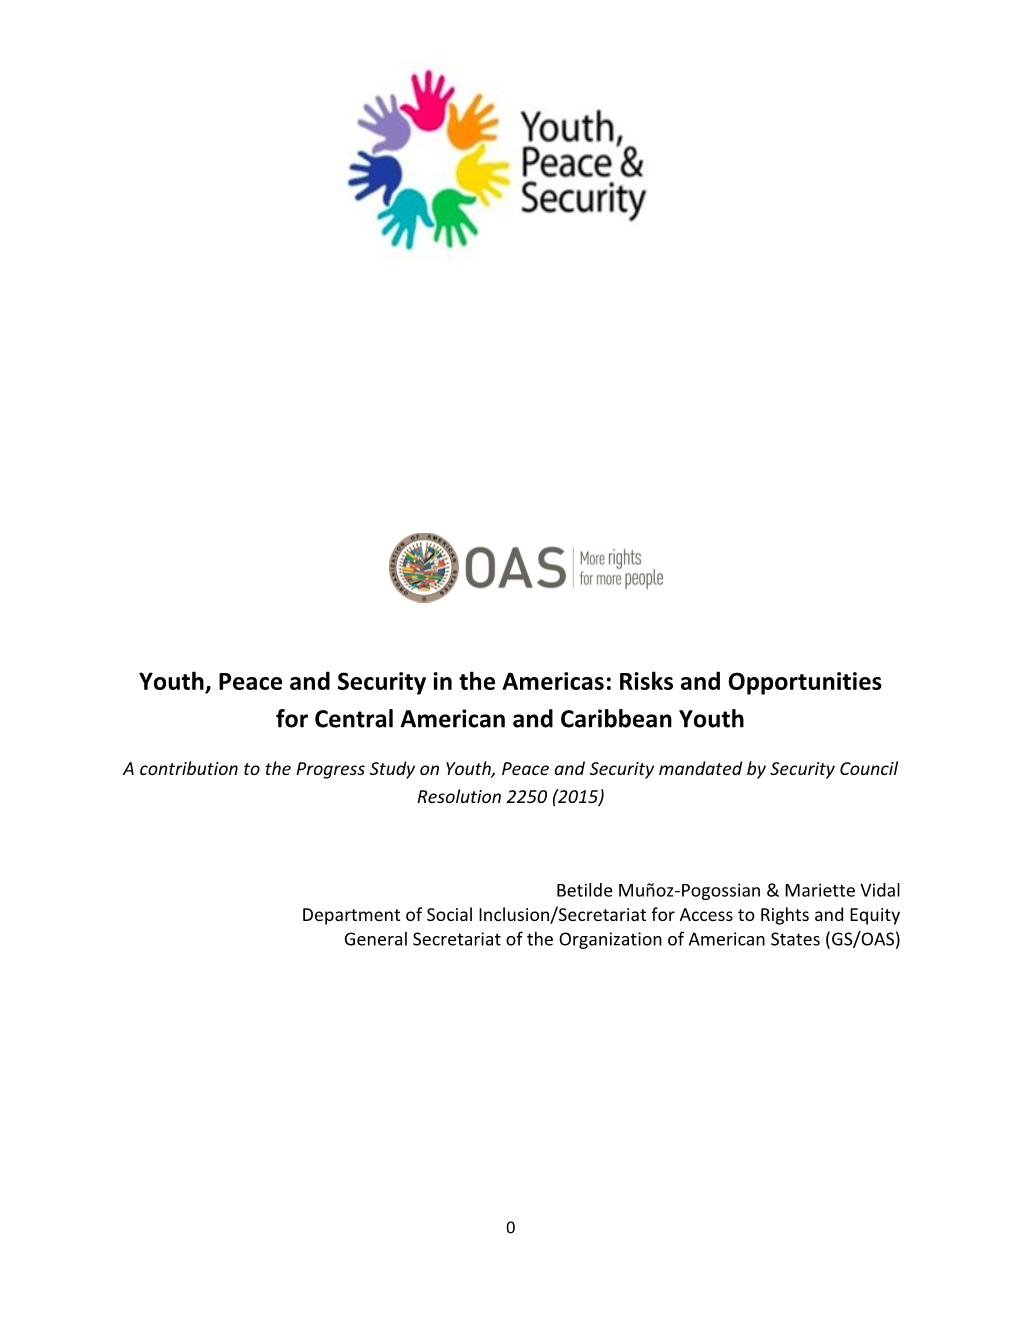 Risks and Opportunities for Central American and Caribbean Youth